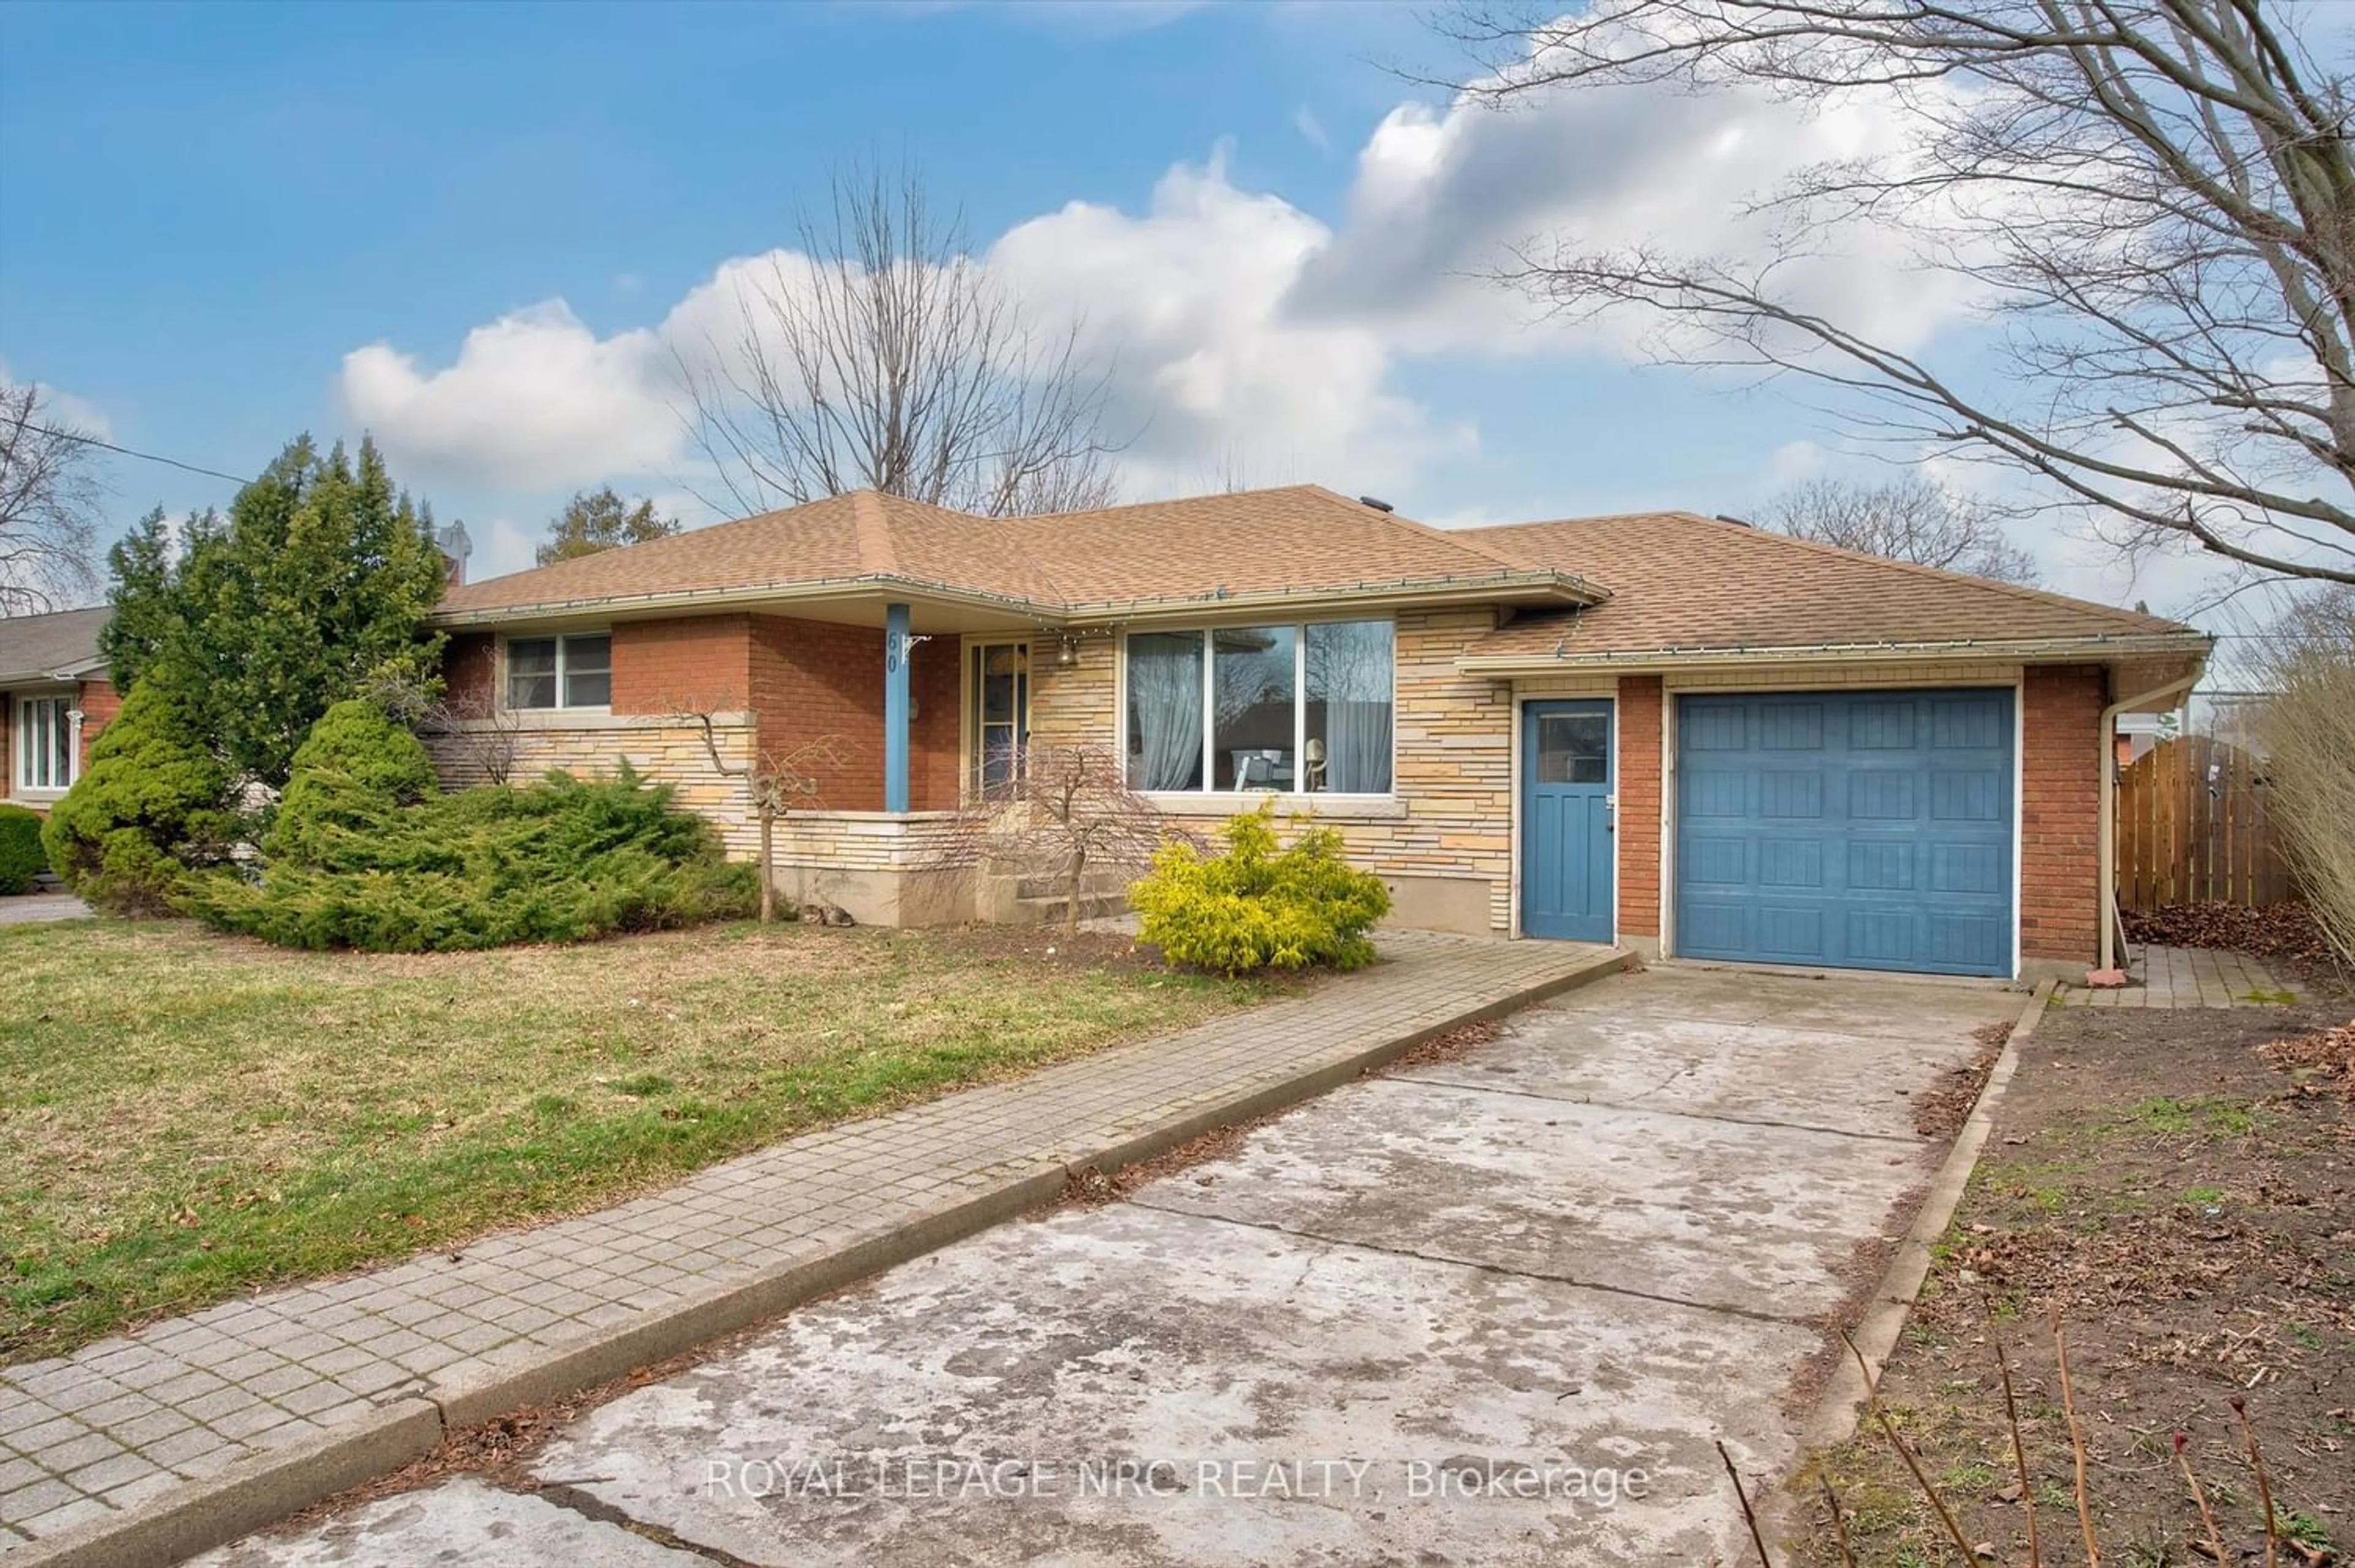 Frontside or backside of a home for 60 Wakelin Terr, St. Catharines Ontario L2M 4K9